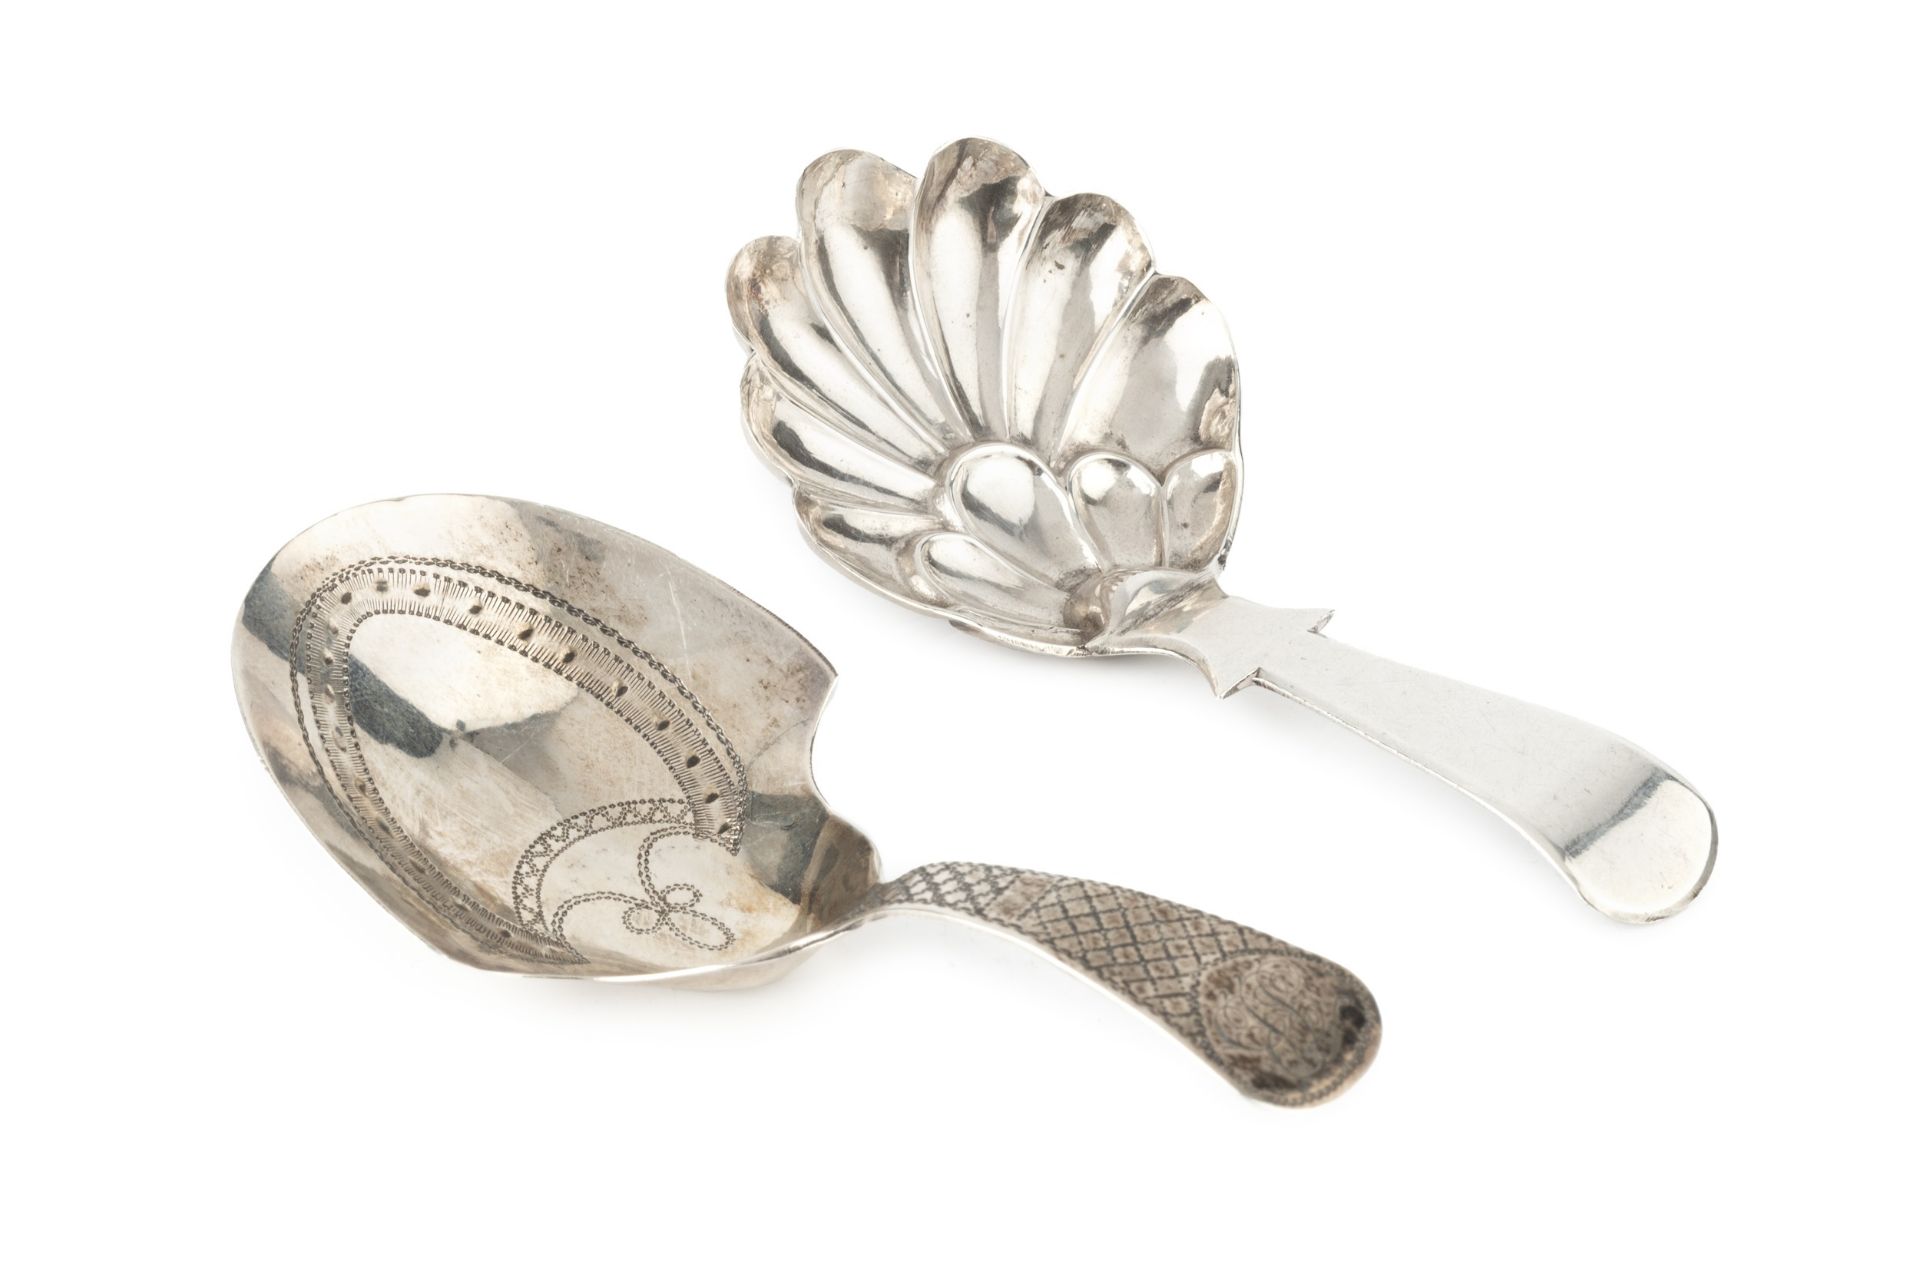 A George III silver caddy spoon, with bright-cut shield shaped bowl and chequered handle, maker I.